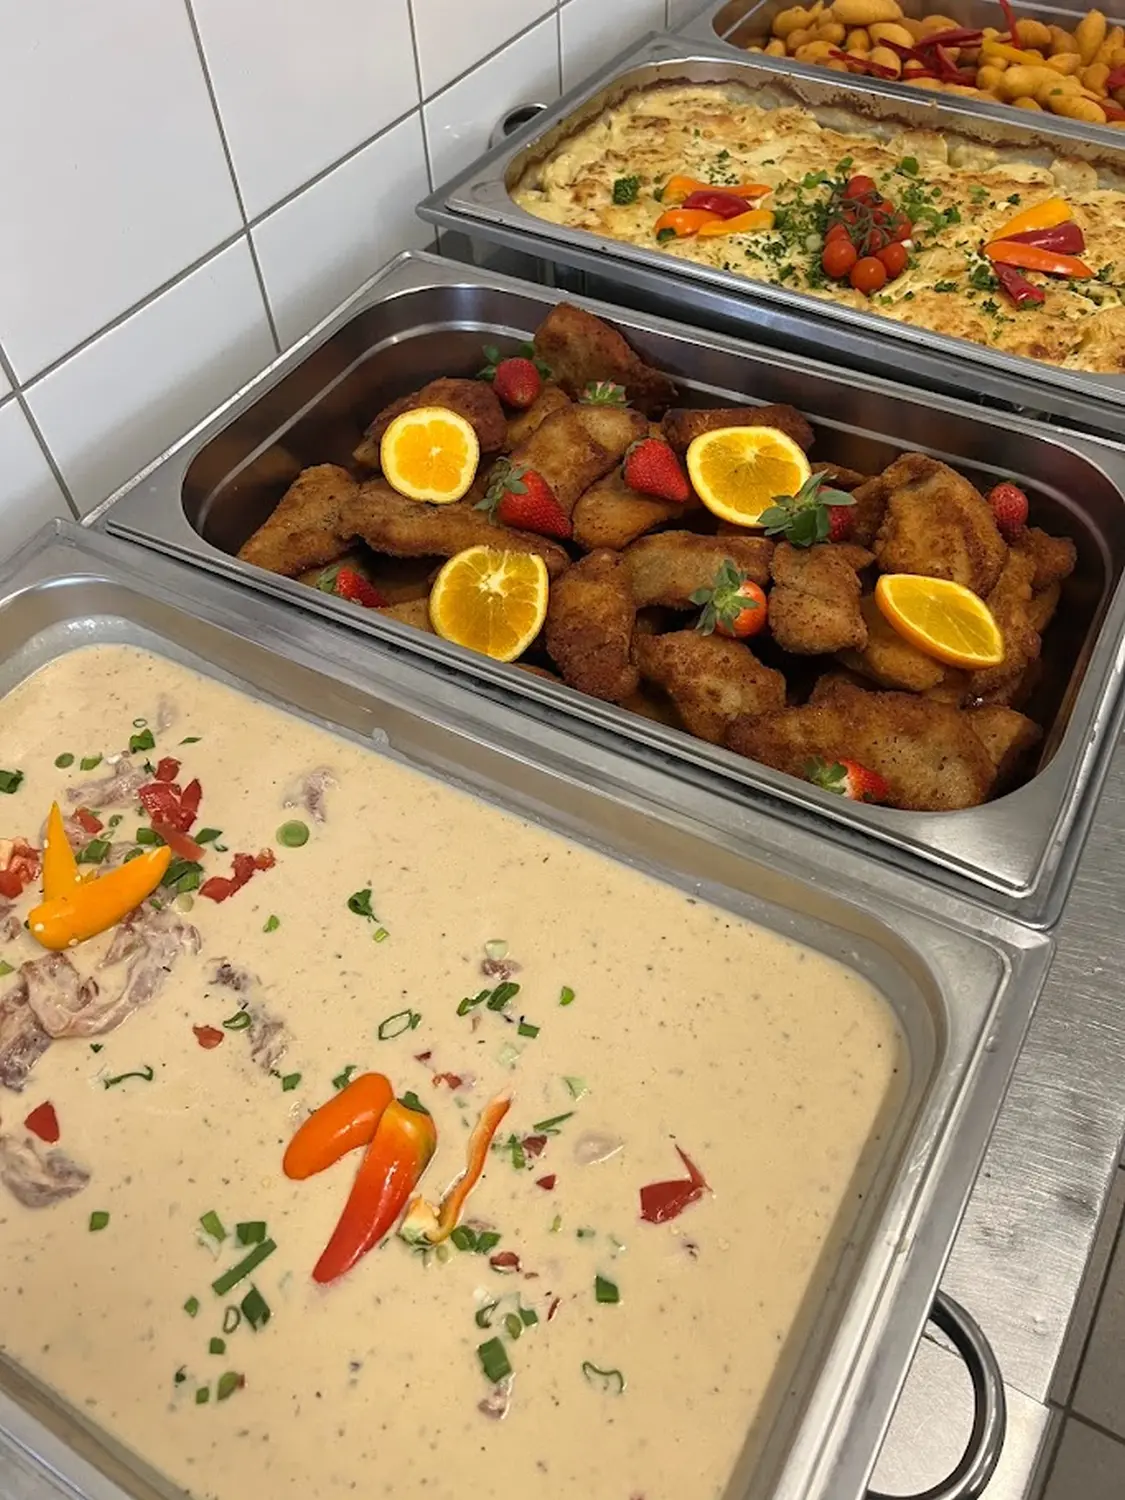 Catering-Service Schimion, Auswahl an Speisen in den Containern